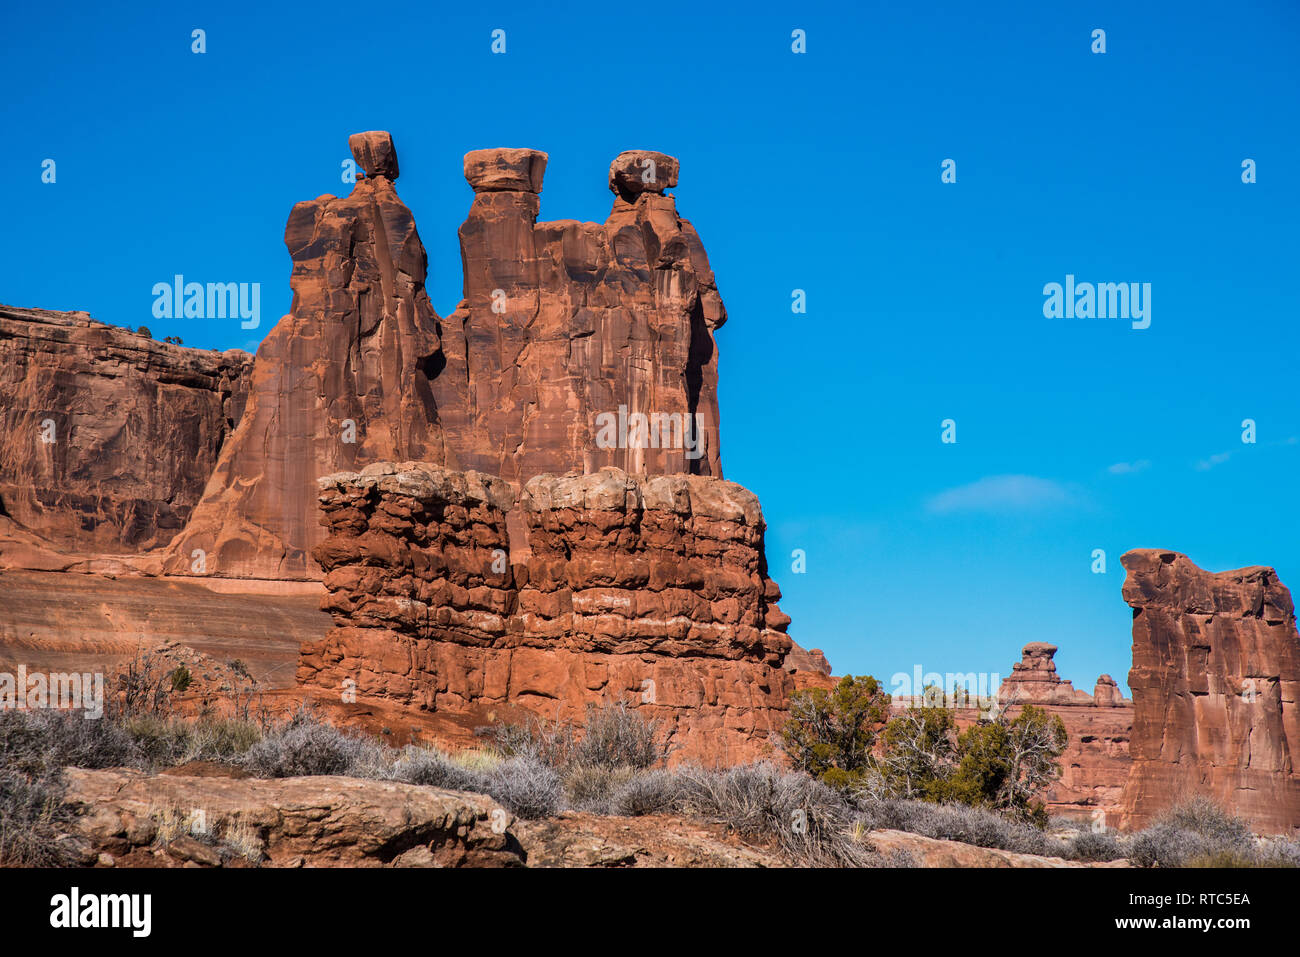 Arches and rock formations in Arches National Park, Utah. Stock Photo